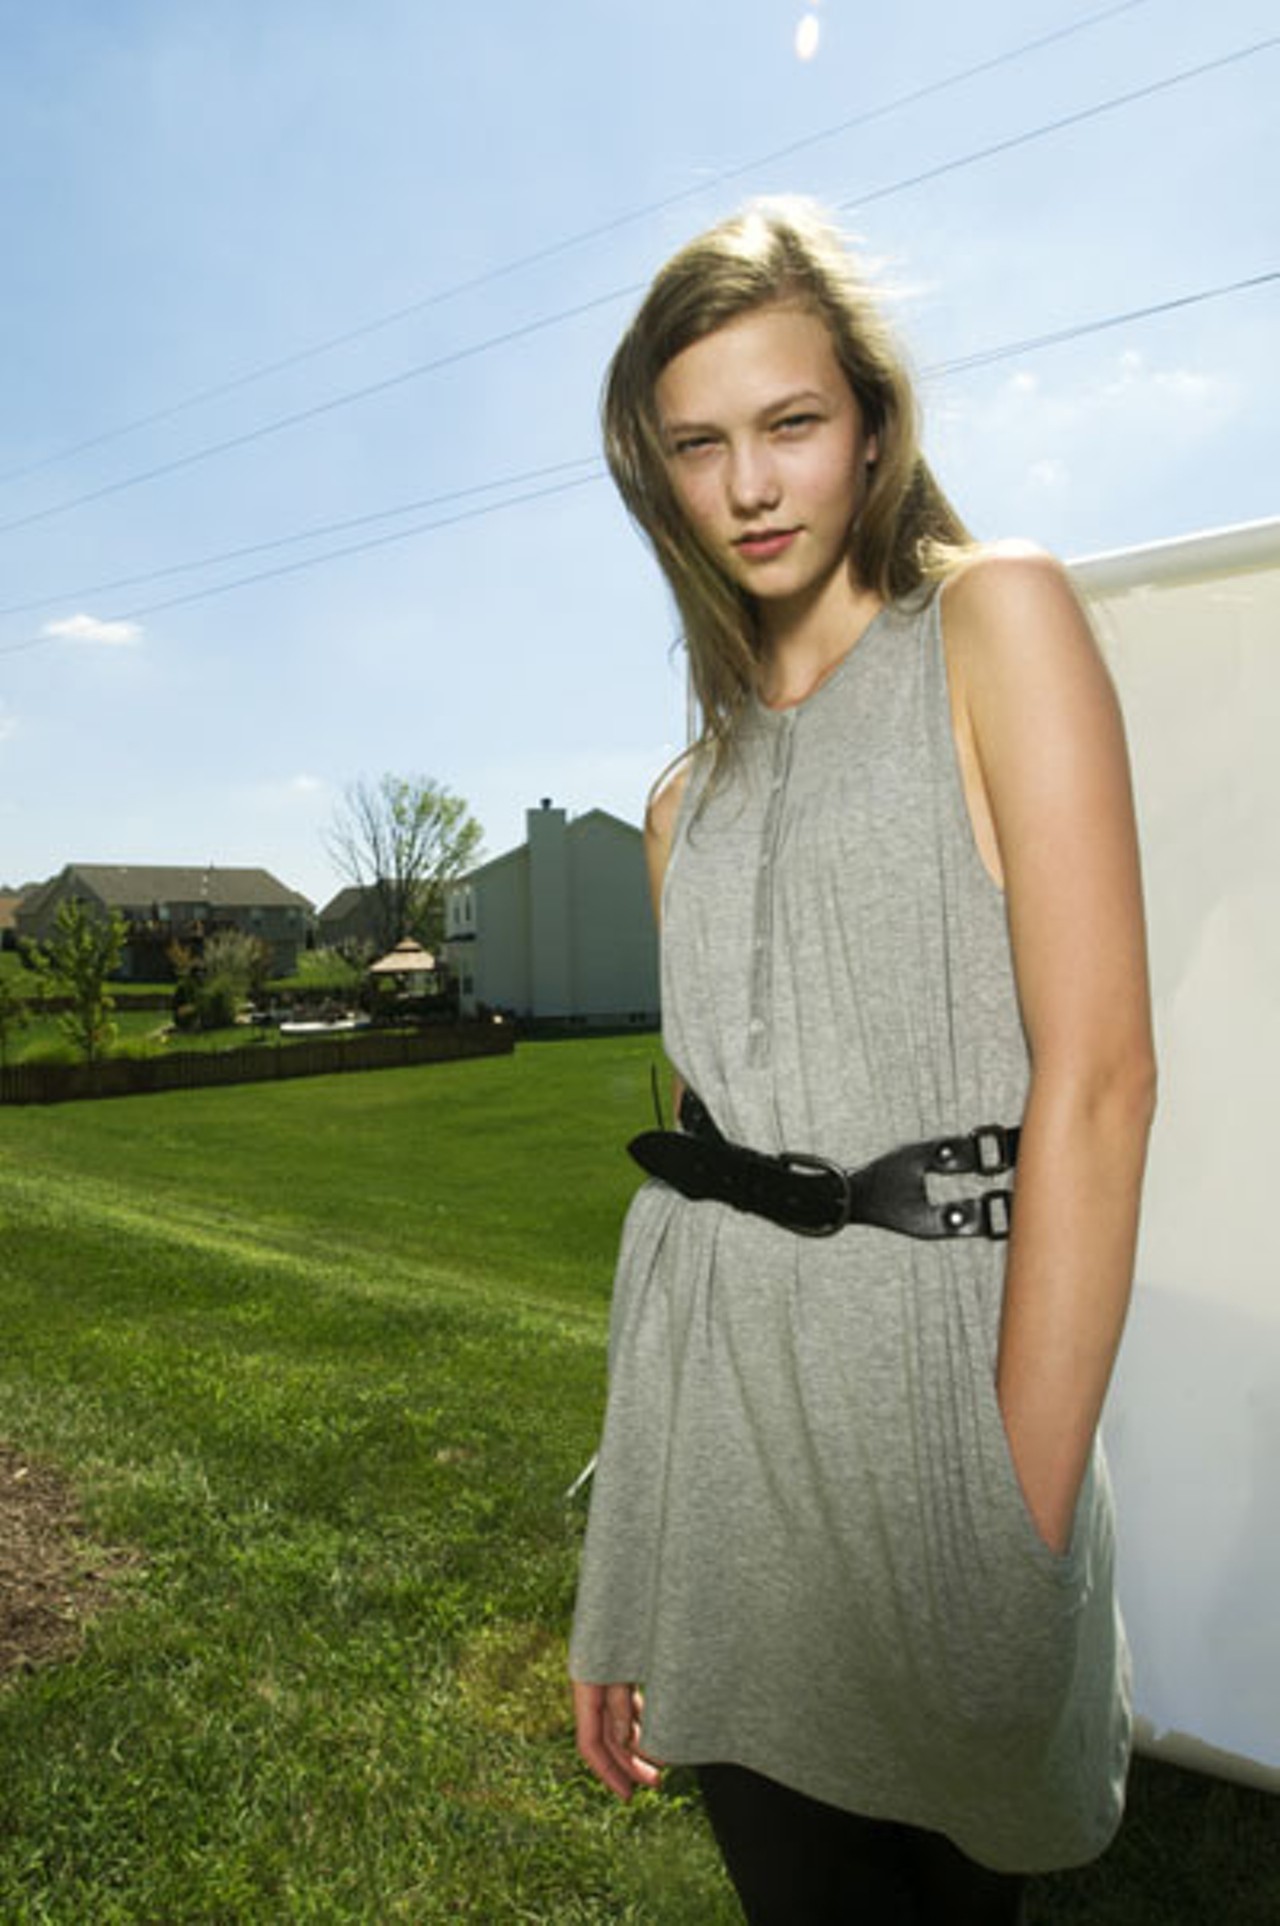 Karlie Kloss.
Read "The It Girls: The next supermodel may be coming from a high school near you" by Aimee Levitt.